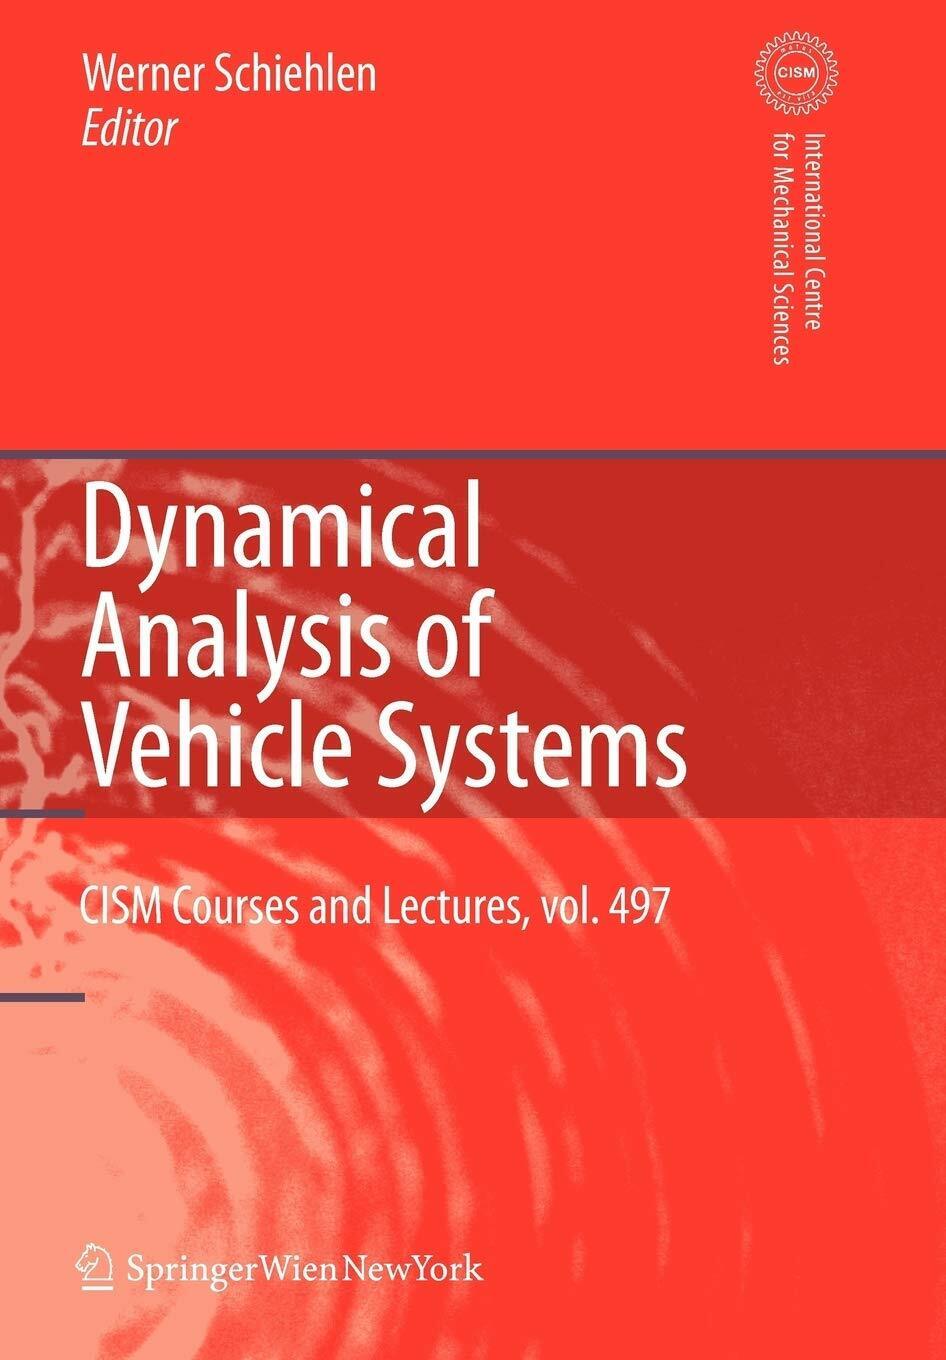 Dynamical Analysis of Vehicle Systems - W. Schiehlen - Springer, 2010